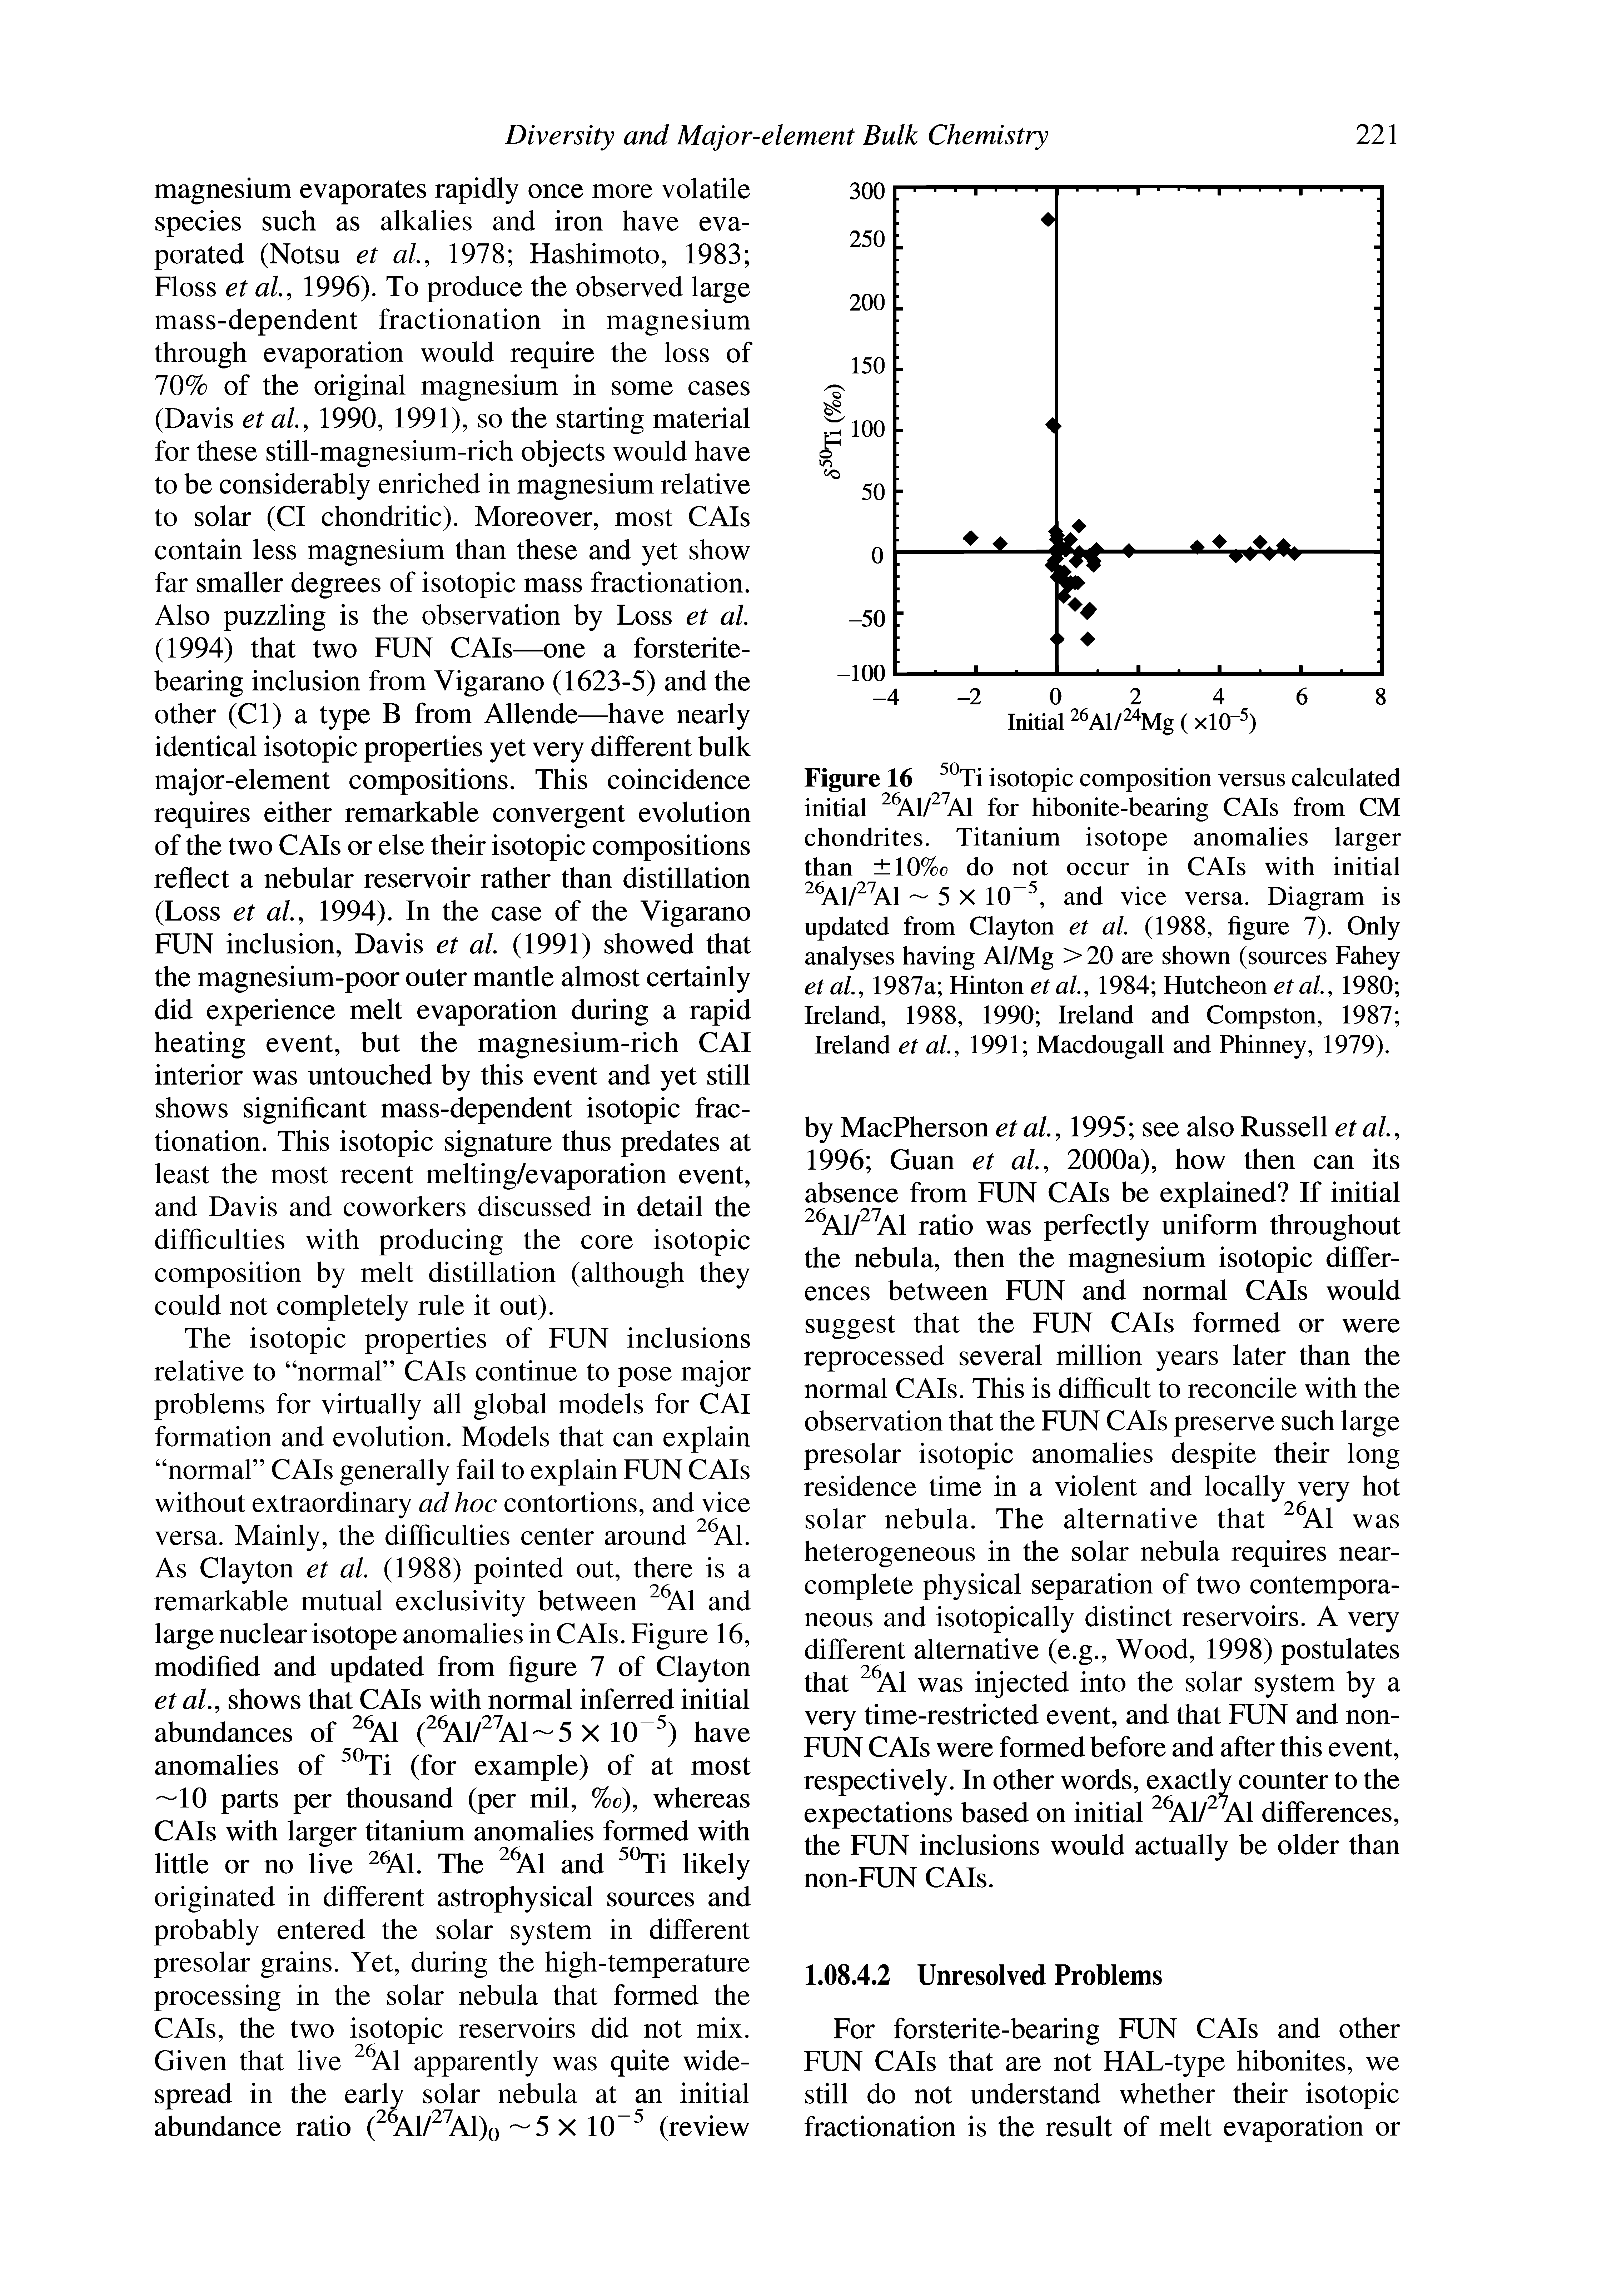 Figure 16 °Ti isotopic composition versus calculated initial Al/ Al for hibonite-bearing CAIs from CM chondrites. Titanium isotope anomalies larger than 10%o do not occur in CAIs with initial Al/ Al 5 X 10 , and vice versa. Diagram is updated from Clayton et aL (1988, figure 7). Only analyses having Al/Mg > 20 are shown (sources Fahey etaL, 1987a Hinton etaL, 1984 Hutcheon etaL, 1980 Ireland, 1988, 1990 Ireland and Compston, 1987 ...